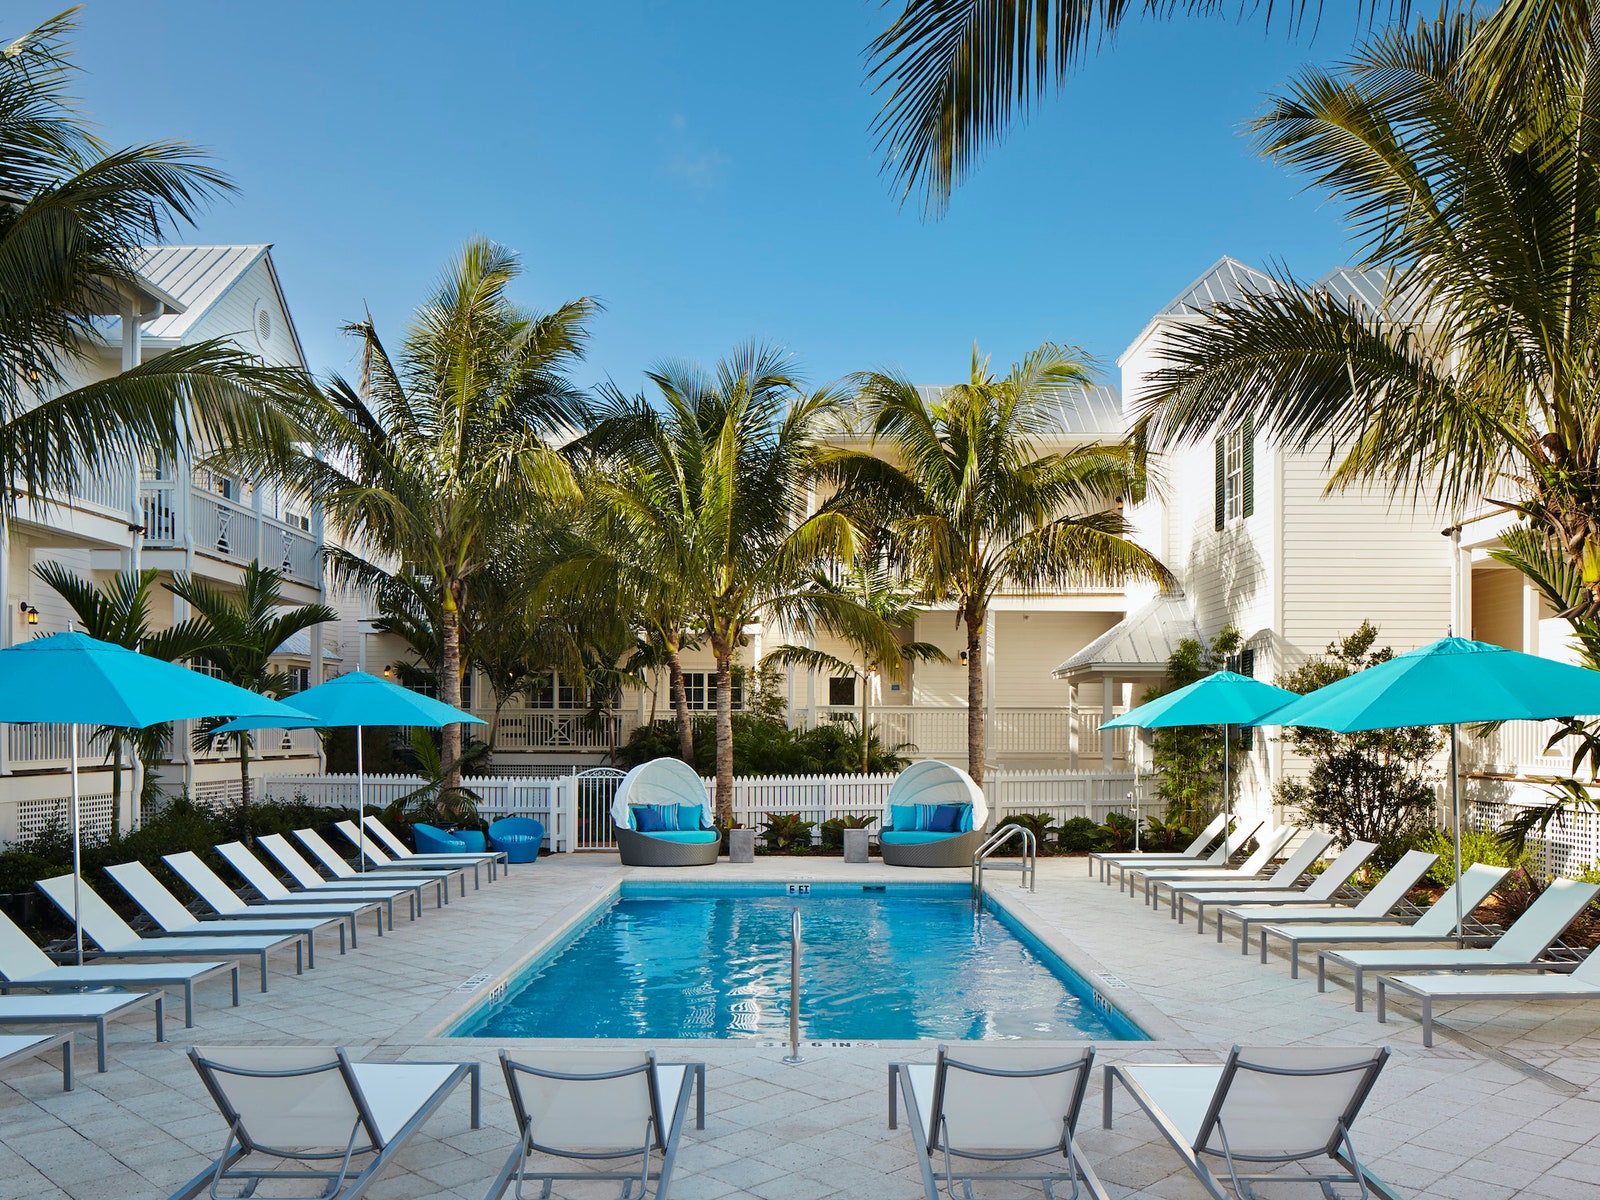 a hotel pool with chaises around it